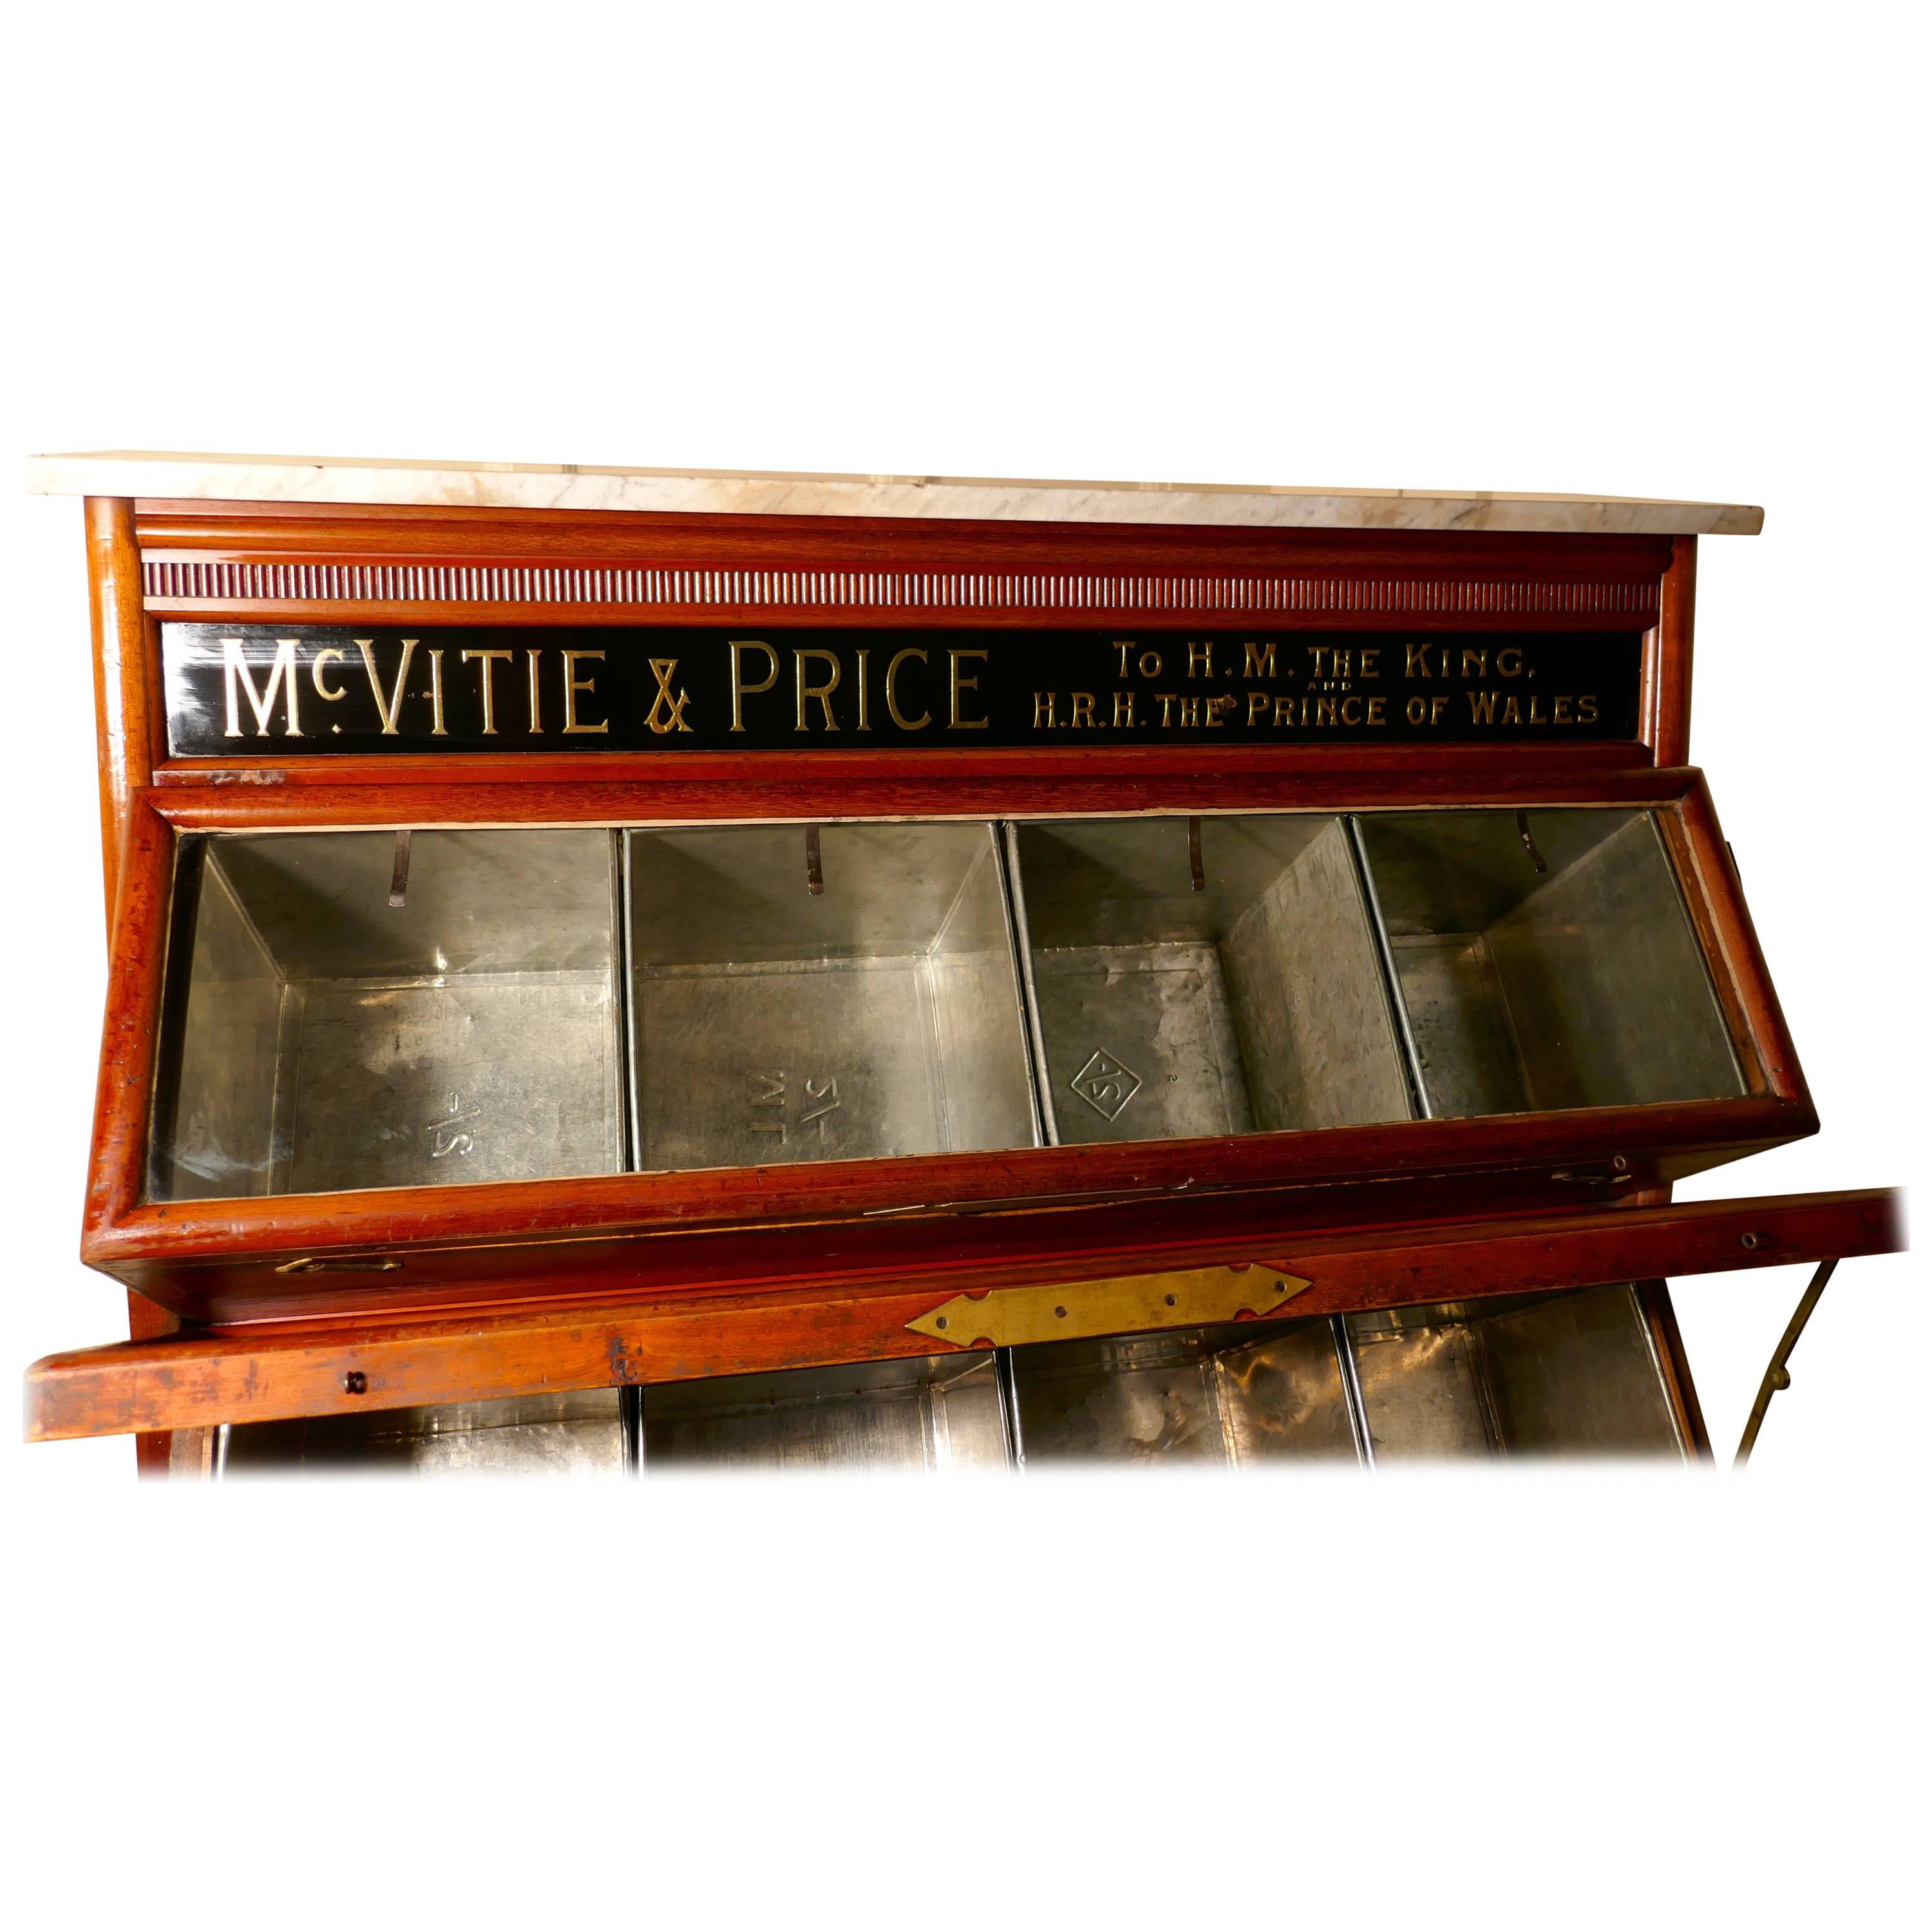 McVitie & Price Cake shop biscuit tin display cabinet

This is a large glazed biscuit tin display cabinet is made in mahogany, it holds the tins at an angle so that the contents can be easily accessed and viewed, there are four tins in each of the